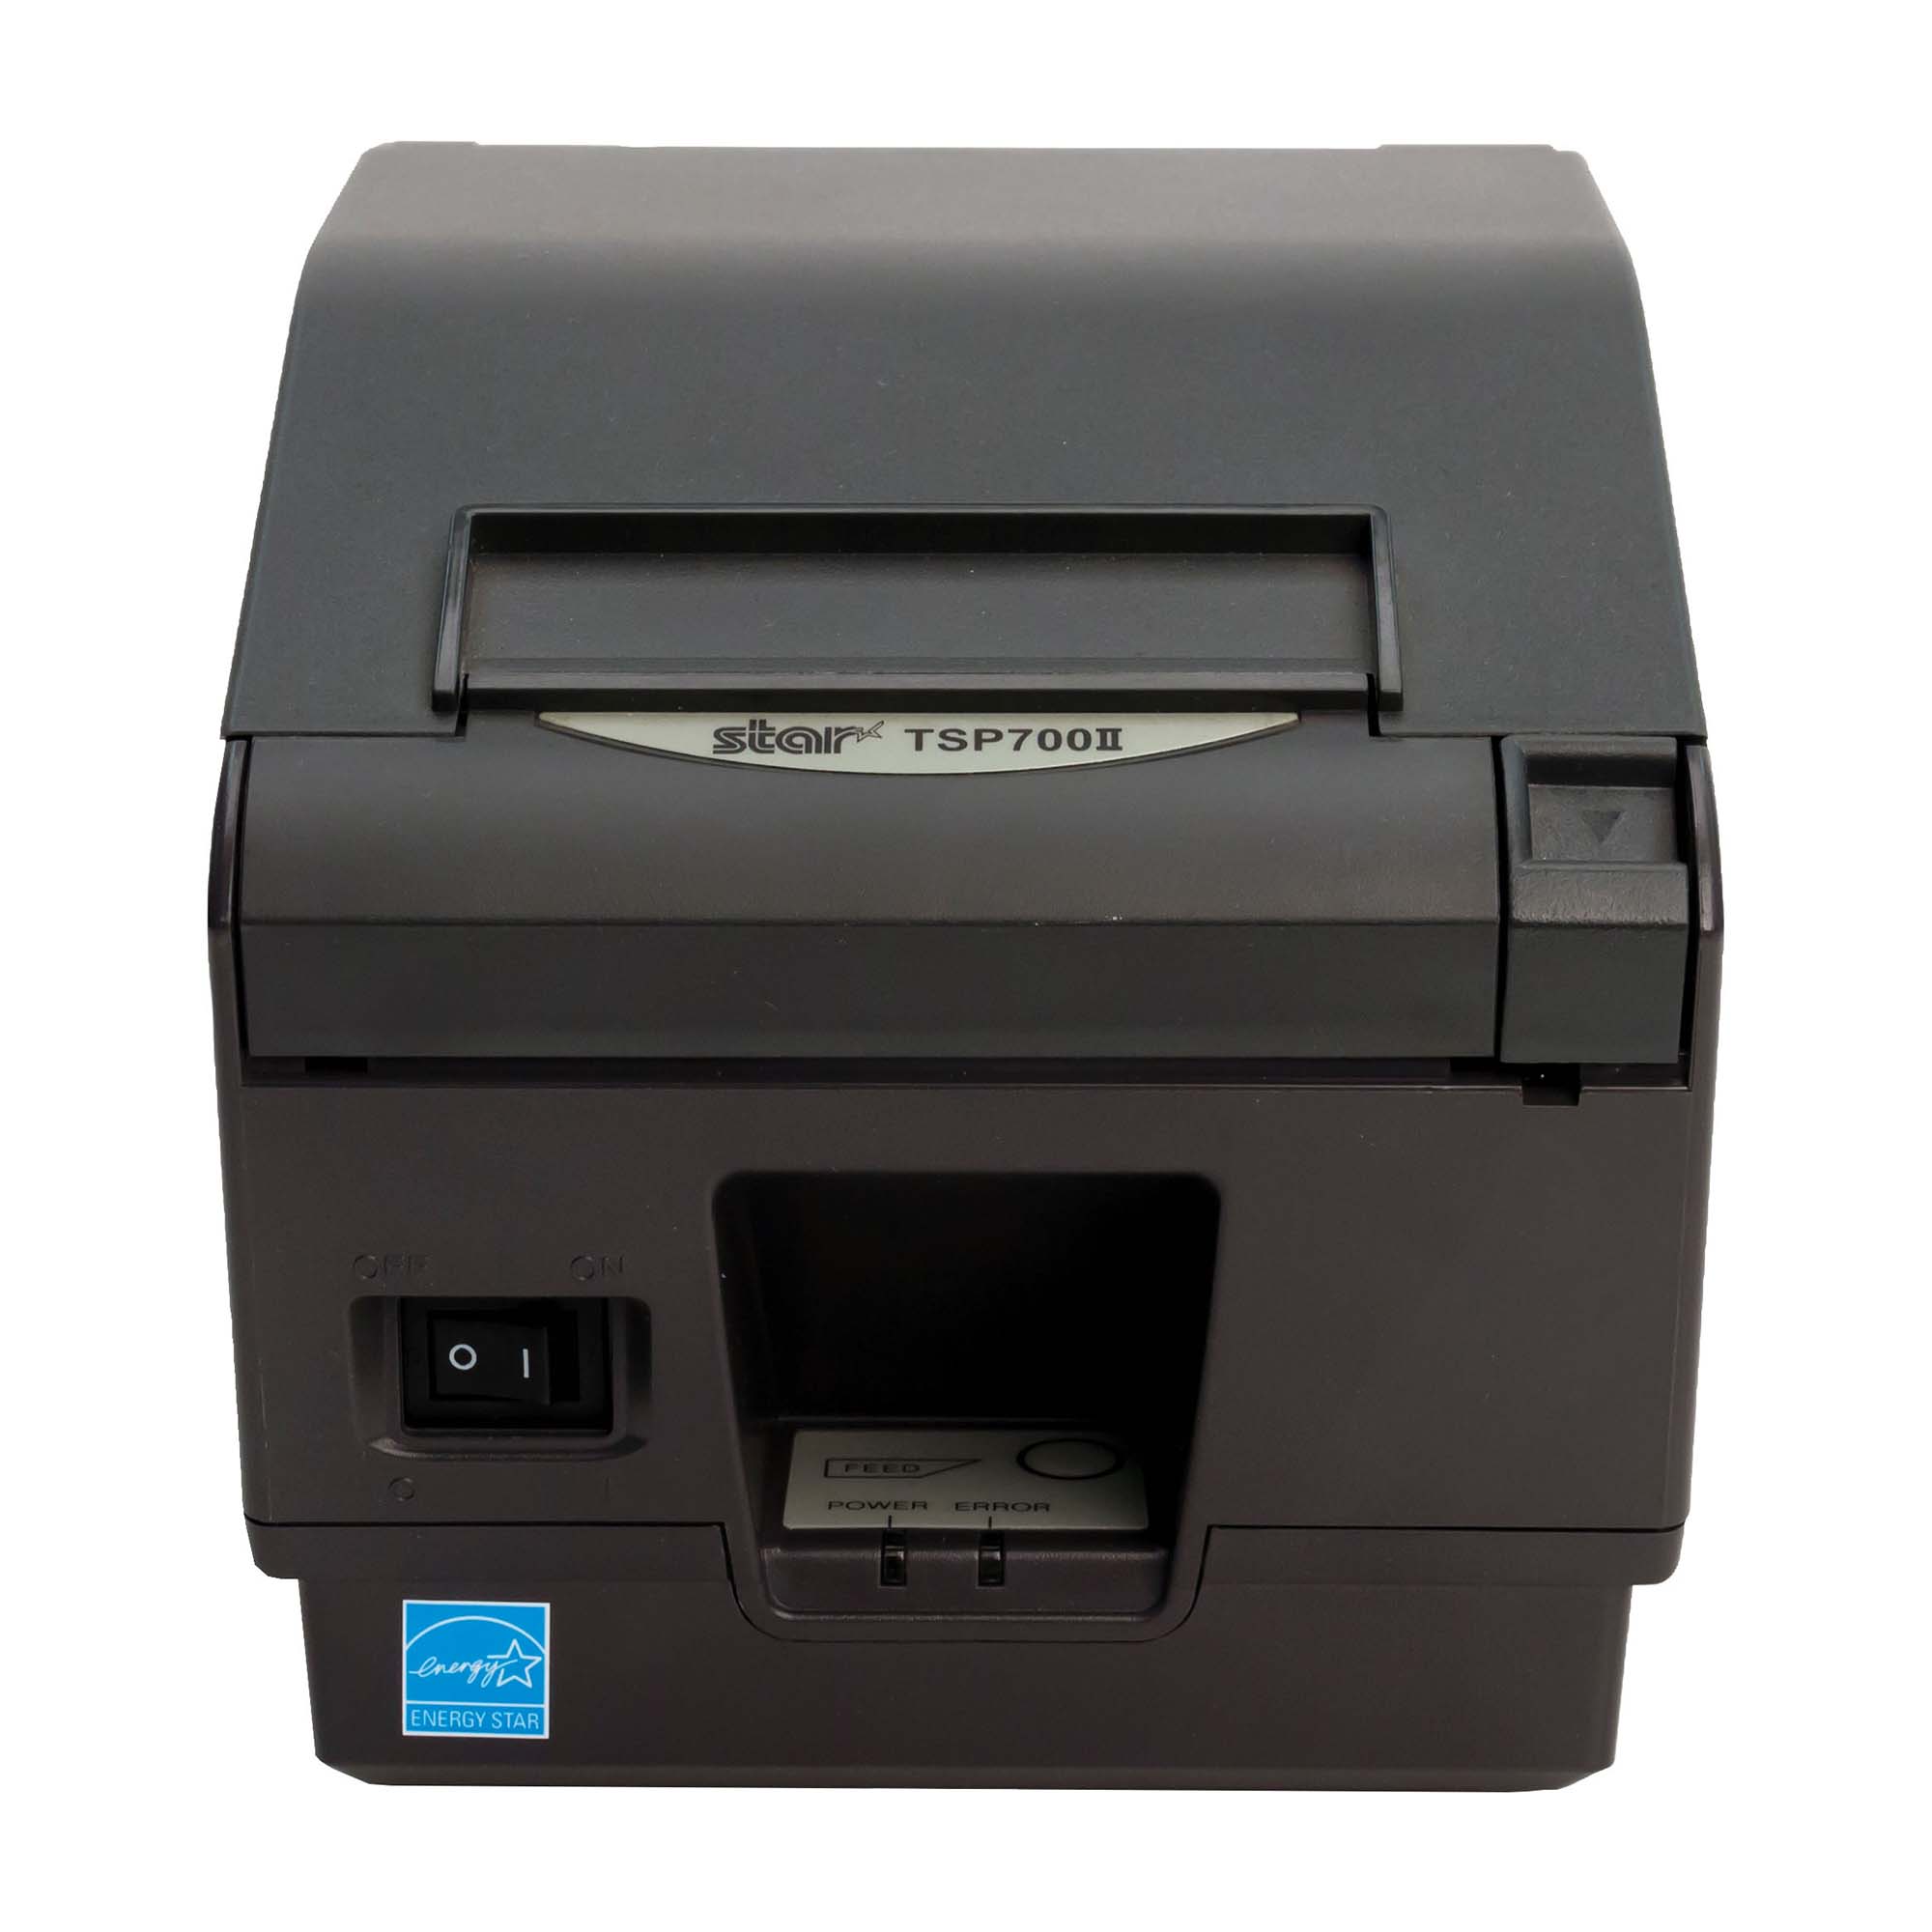 Star Micronics 37999950 TSP743IIL-24 GRY Thermal Printer Ethernet, Need EXT PS